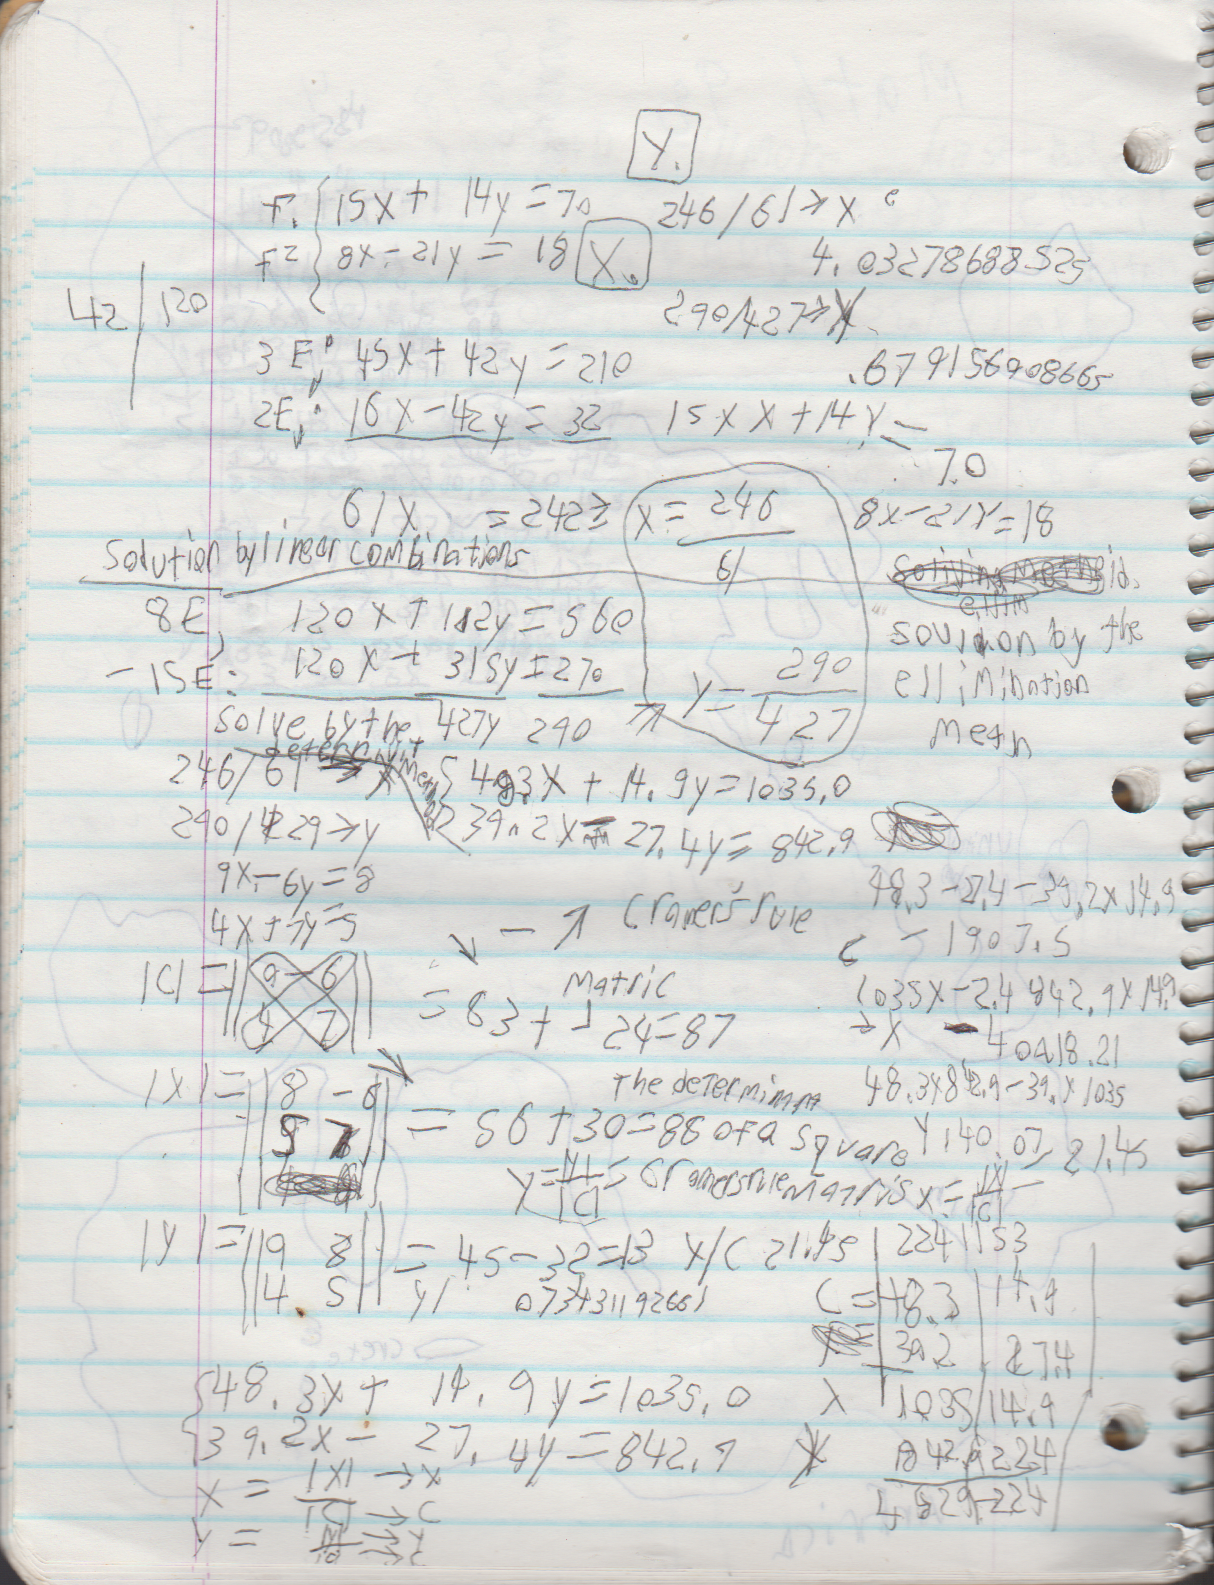 1996-08-18 - Saturday - 11 yr old Joey Arnold's School Book, dates through to 1998 apx, mostly 96, Writings, Drawings, Etc-036.png